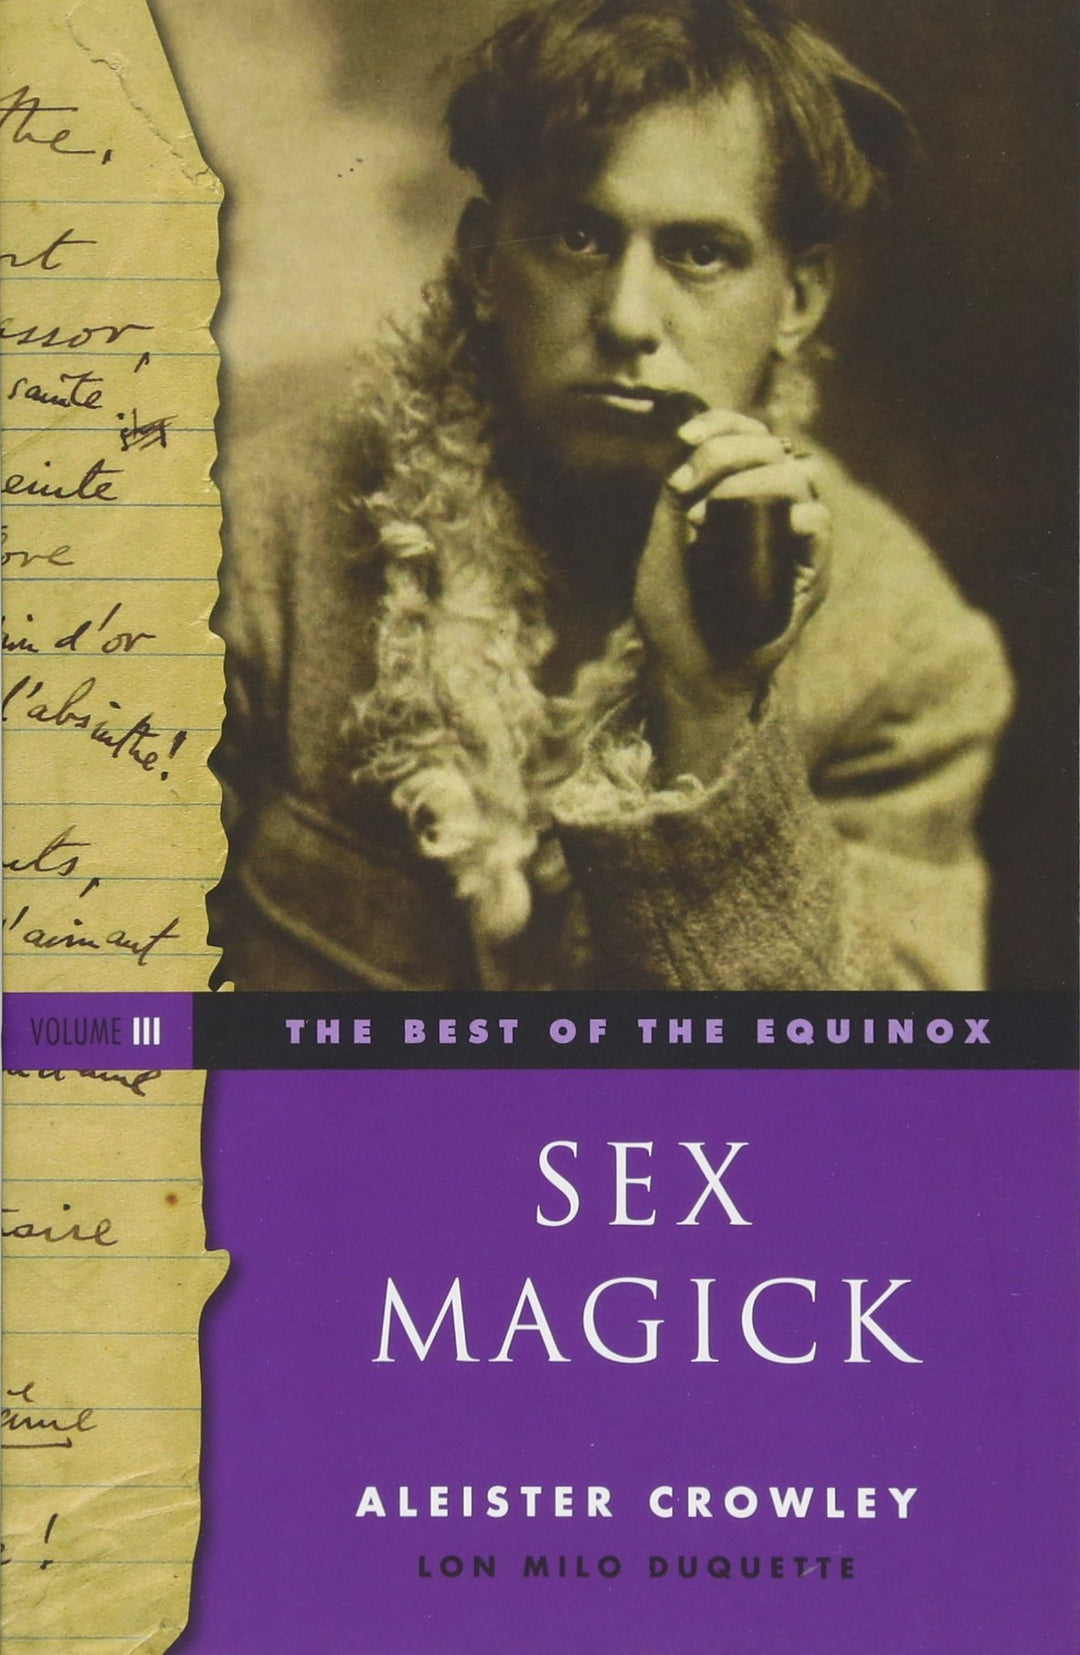 The Best of the Equinox, Vol. 3: Sex Magick by Aleister Crowley